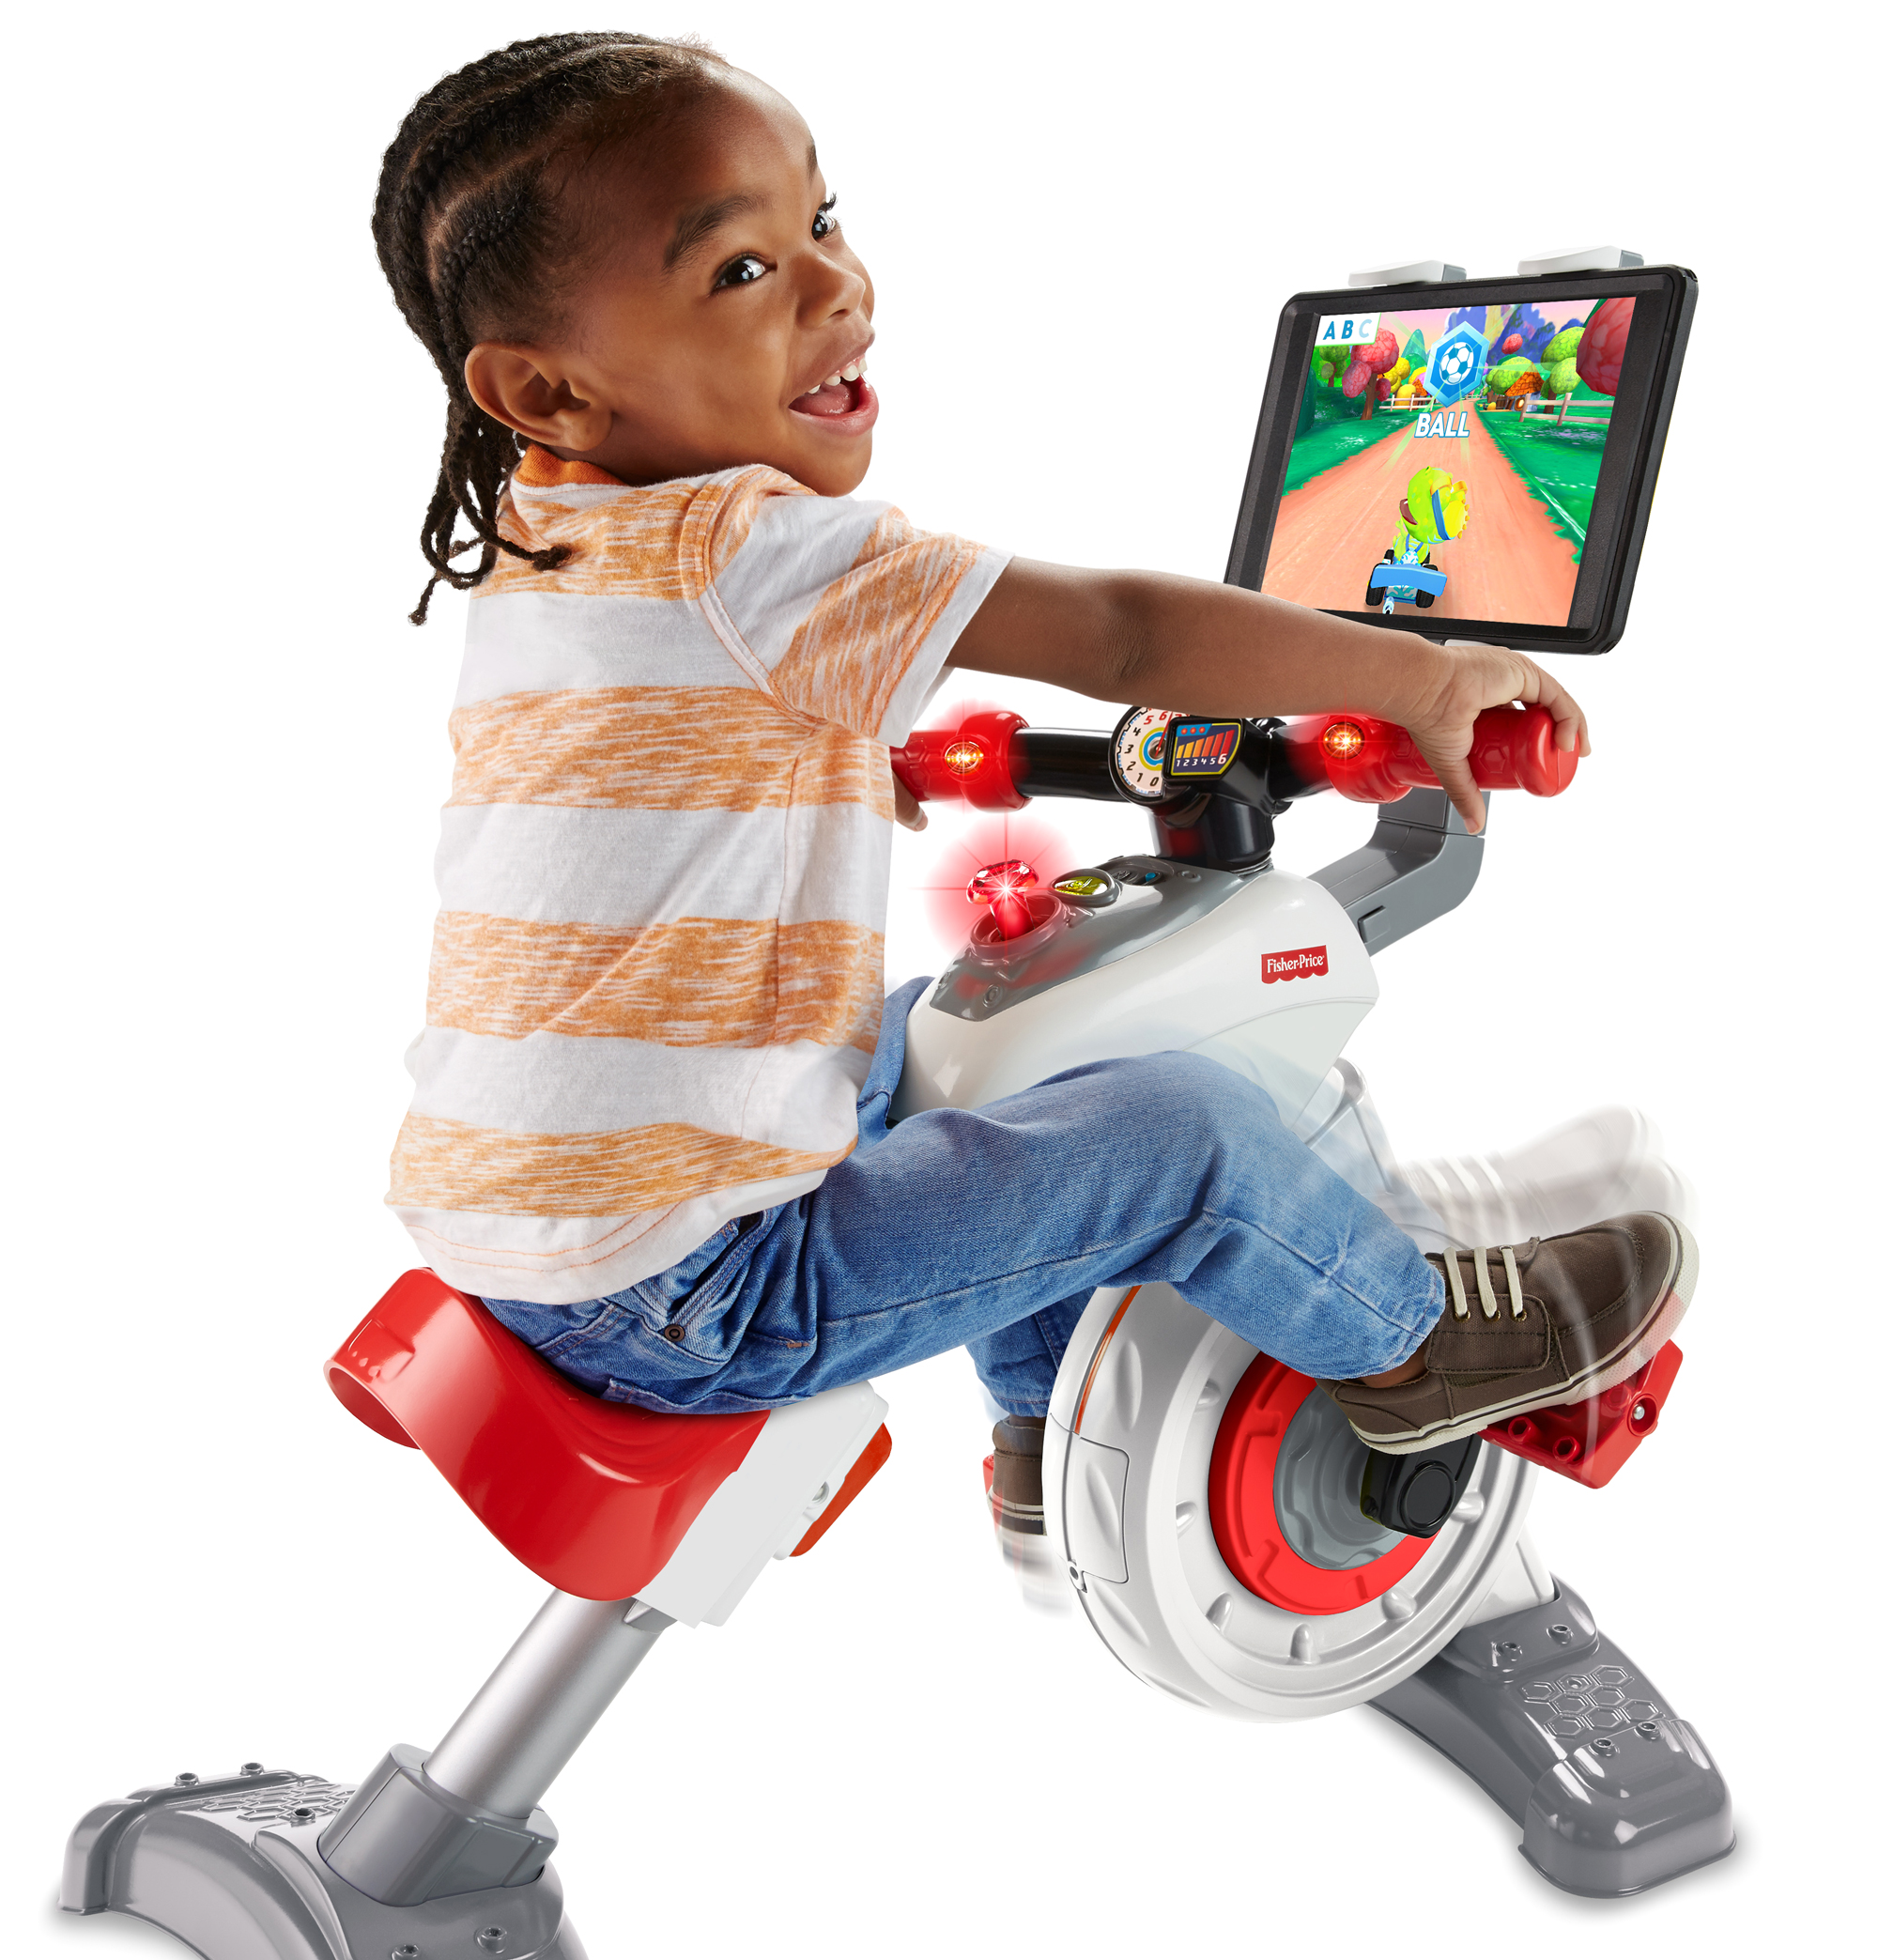 Fisher-Price Will Battle Childhood Obesity With An Exercise Bike Tablet Holder